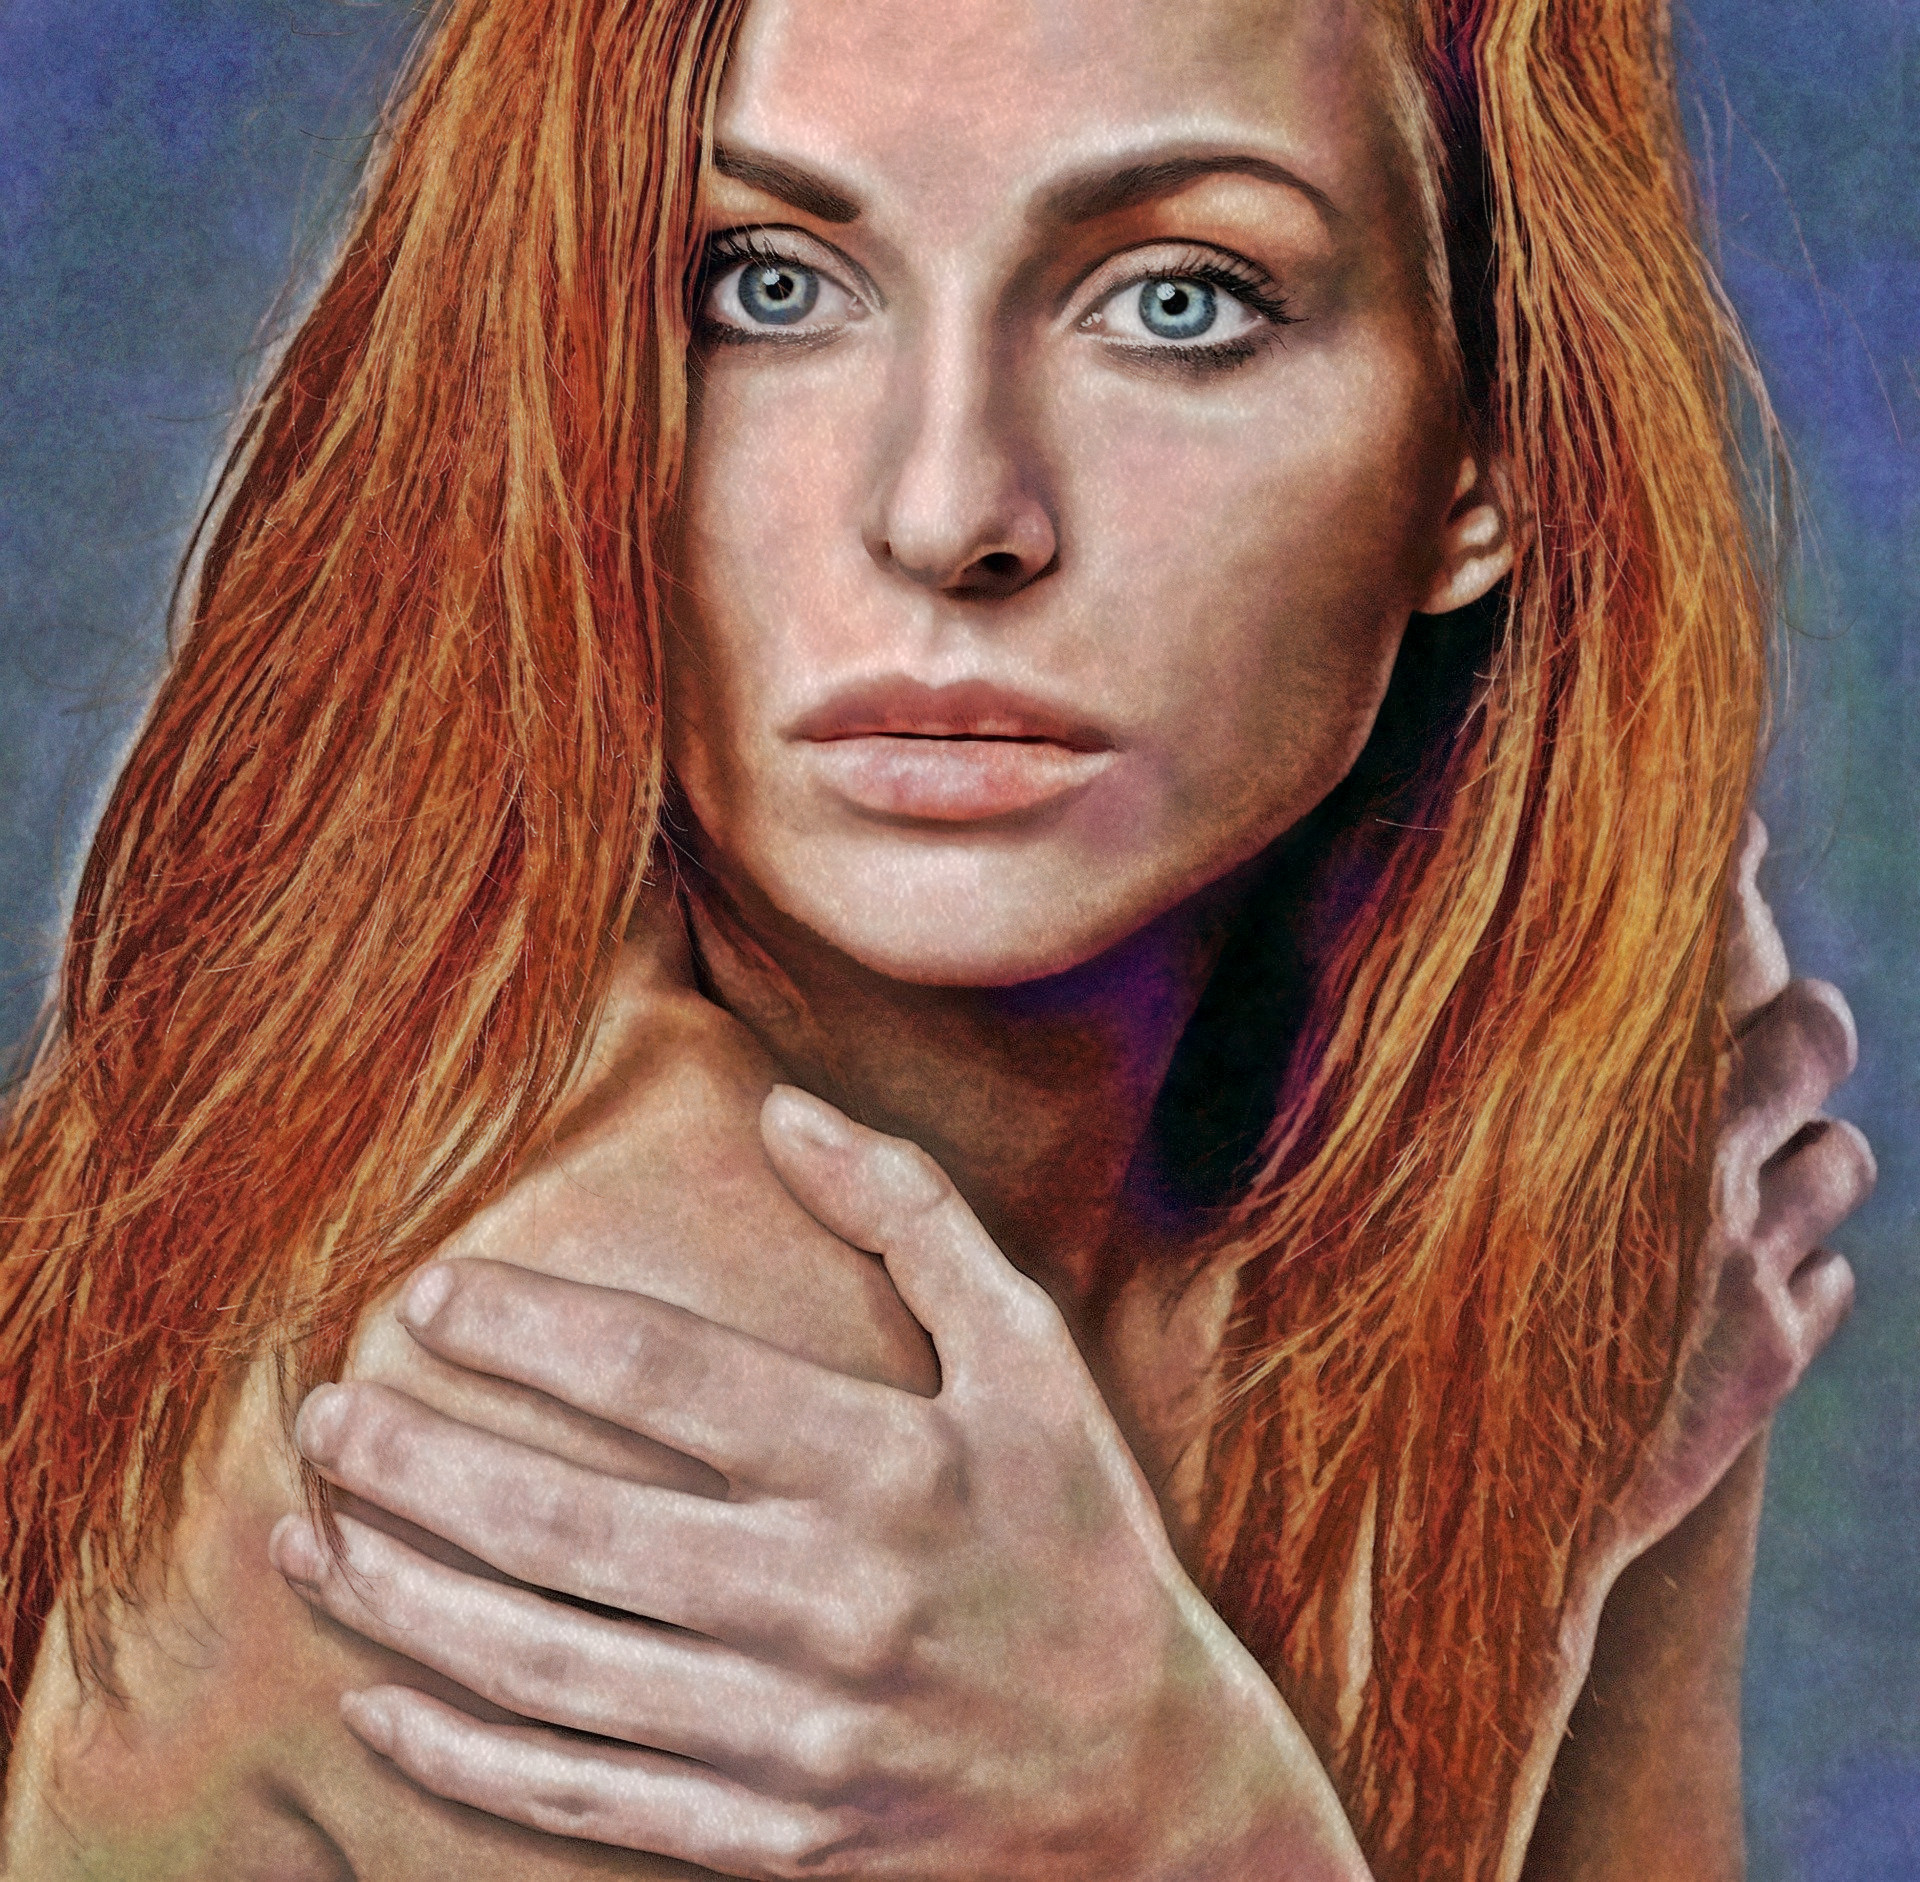 2023-11-04 14-57-22 girl-2120196_1920 with a Free Paint Effect, paint Painting, strokes Constr, contour GradN, poster GmPoster, toppat Crystal, postpro Retinex.jpeg